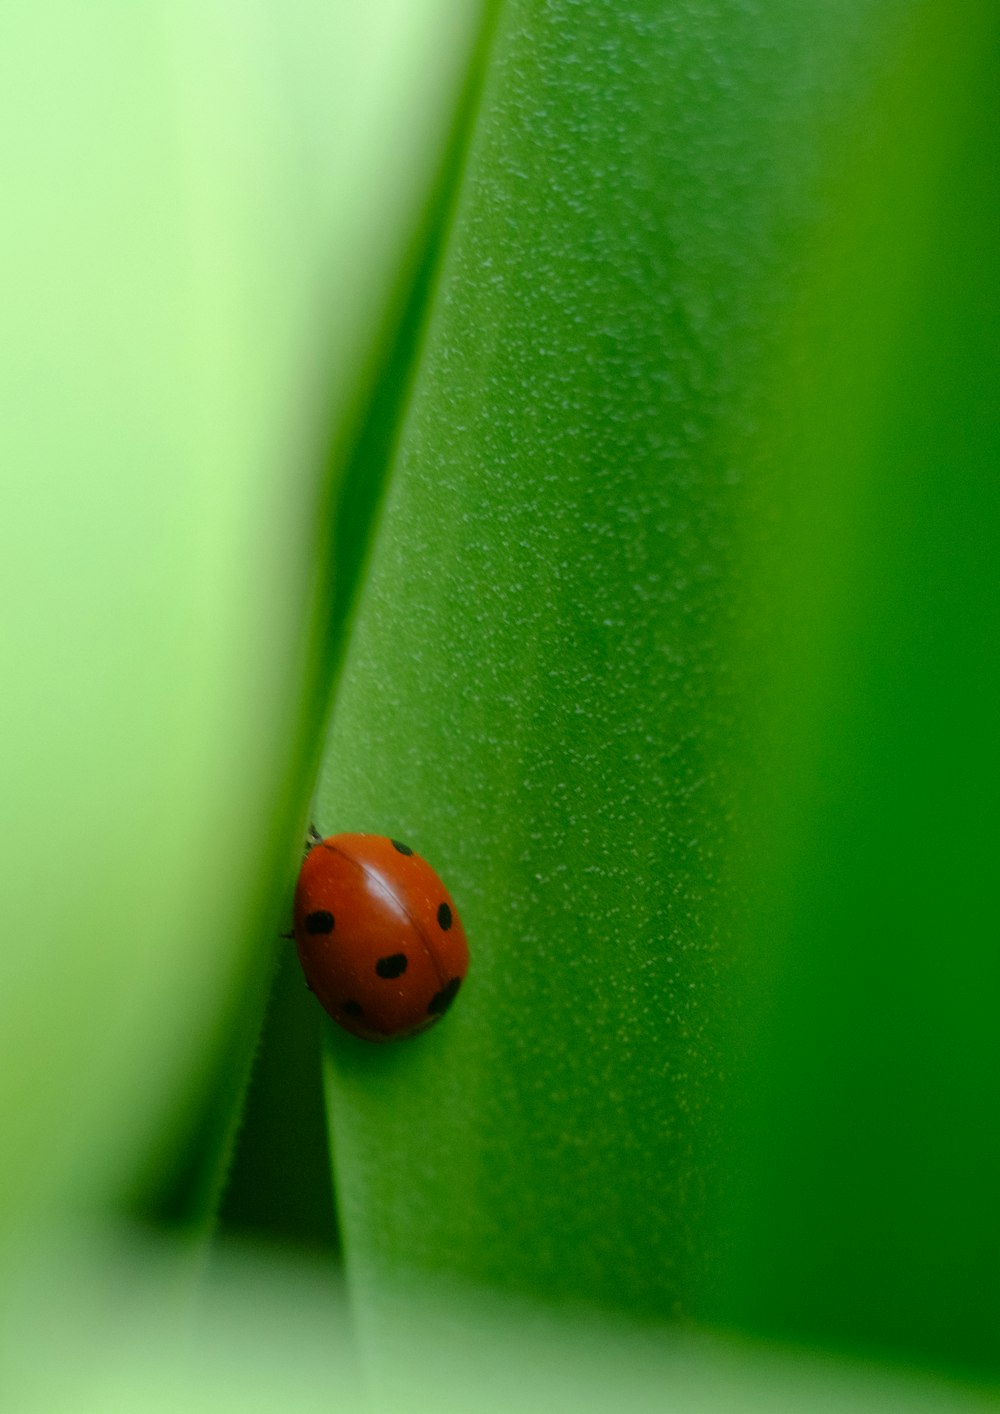 red ladybug on green surface